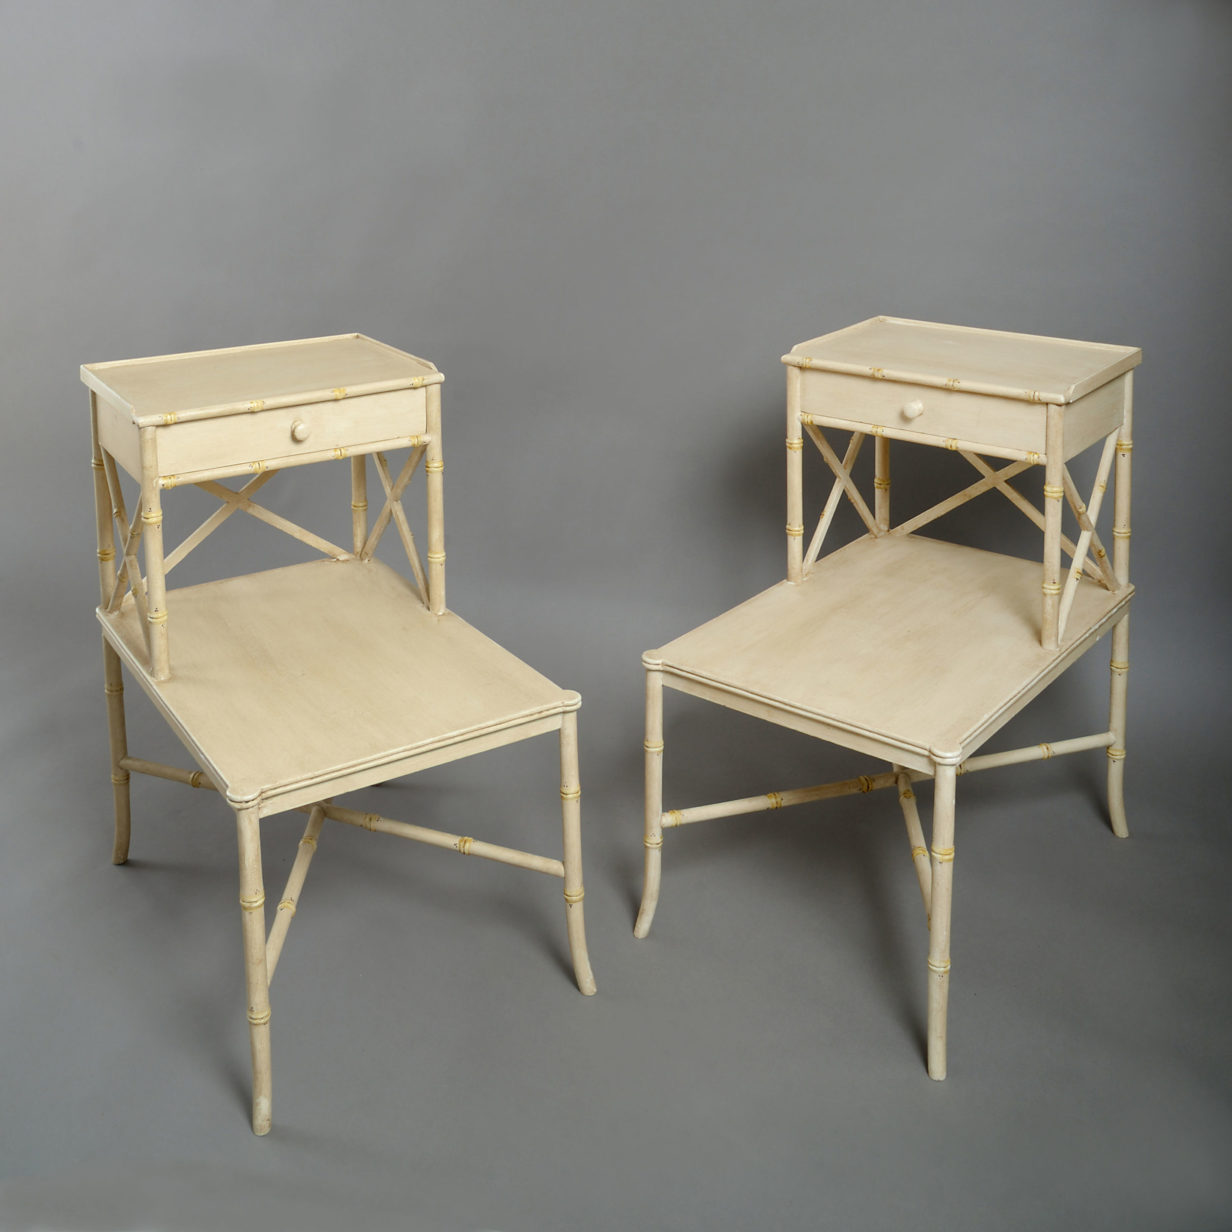 A pair of faux bamboo bedside tables